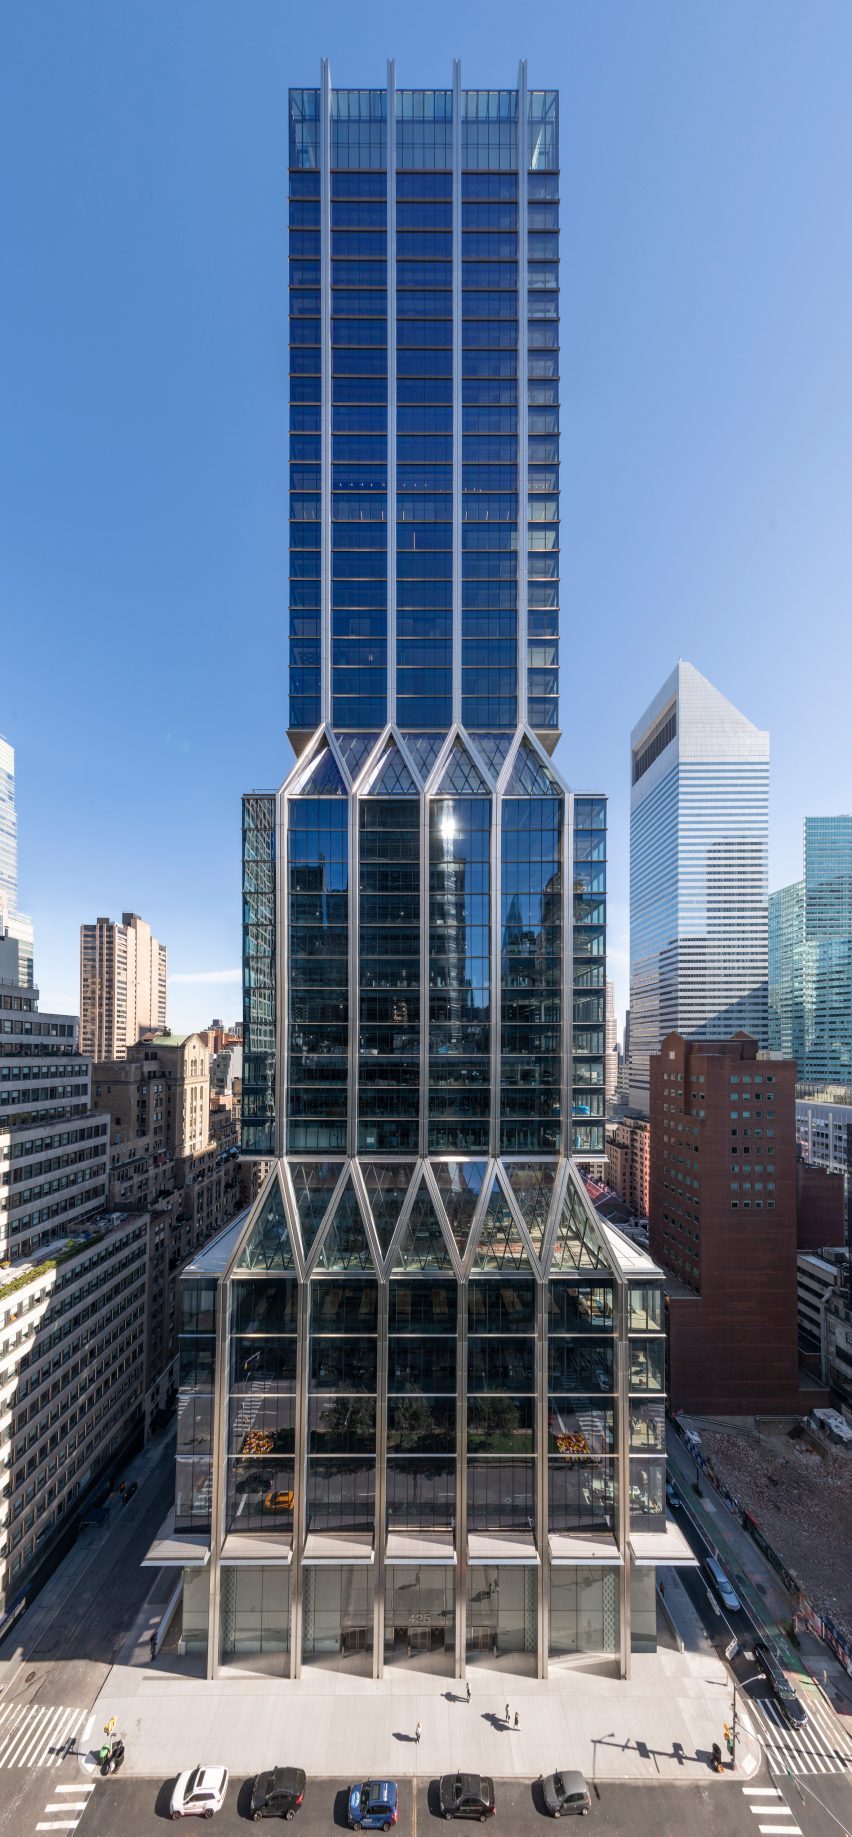 Full front elevation of 425 Park Avenue